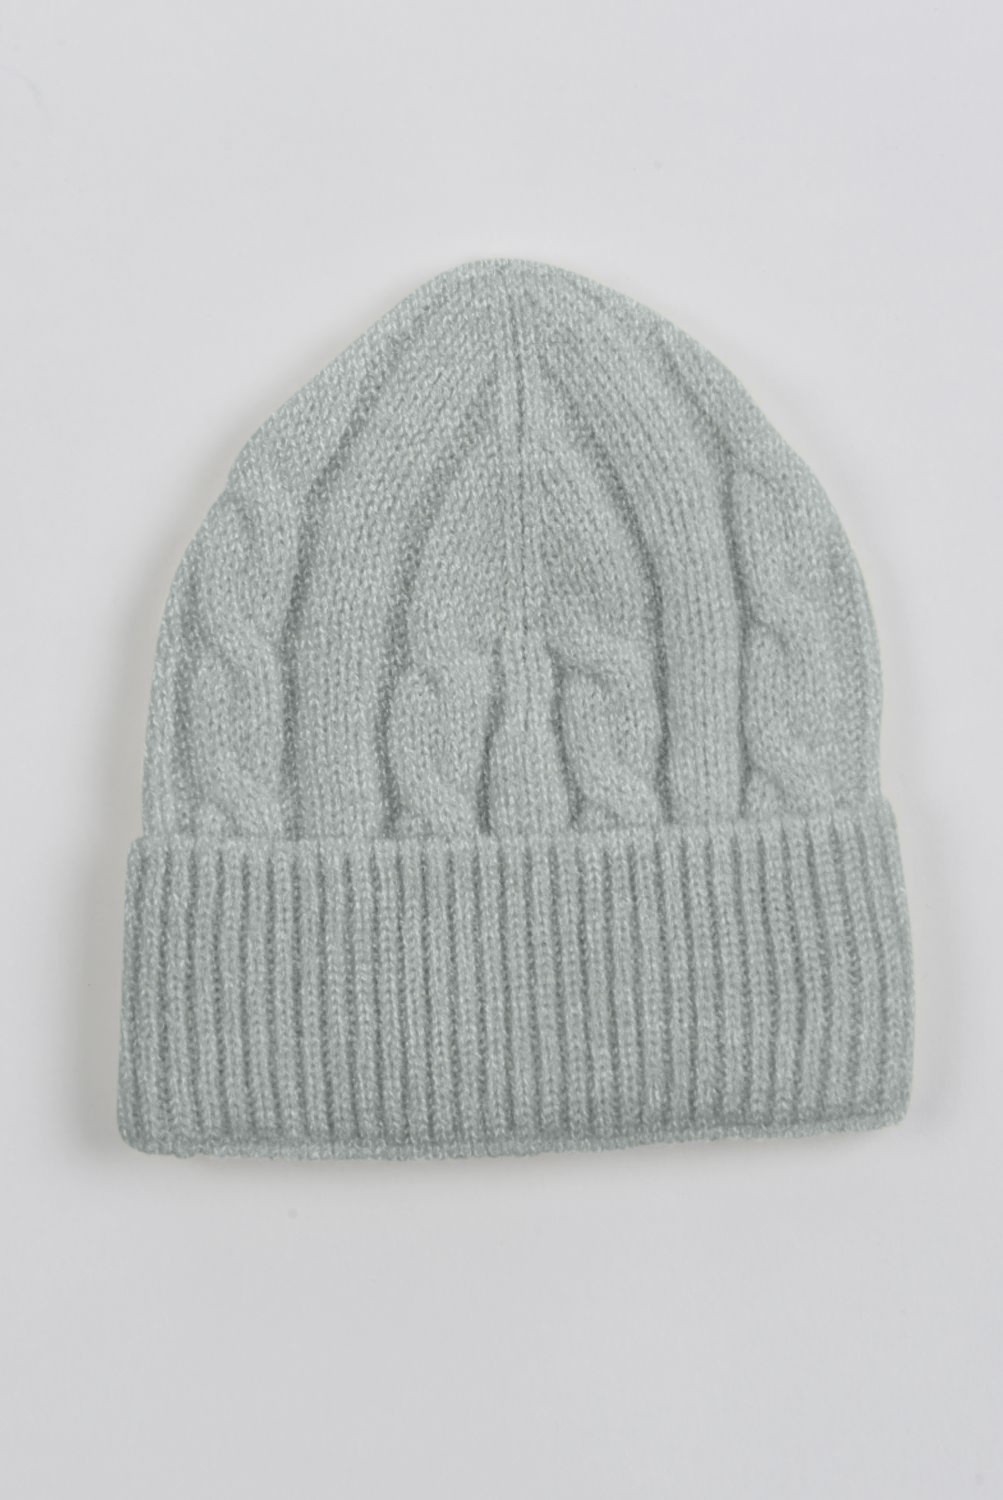 hat | cashmere beanie Italy grey light Cashmere Baby UK in